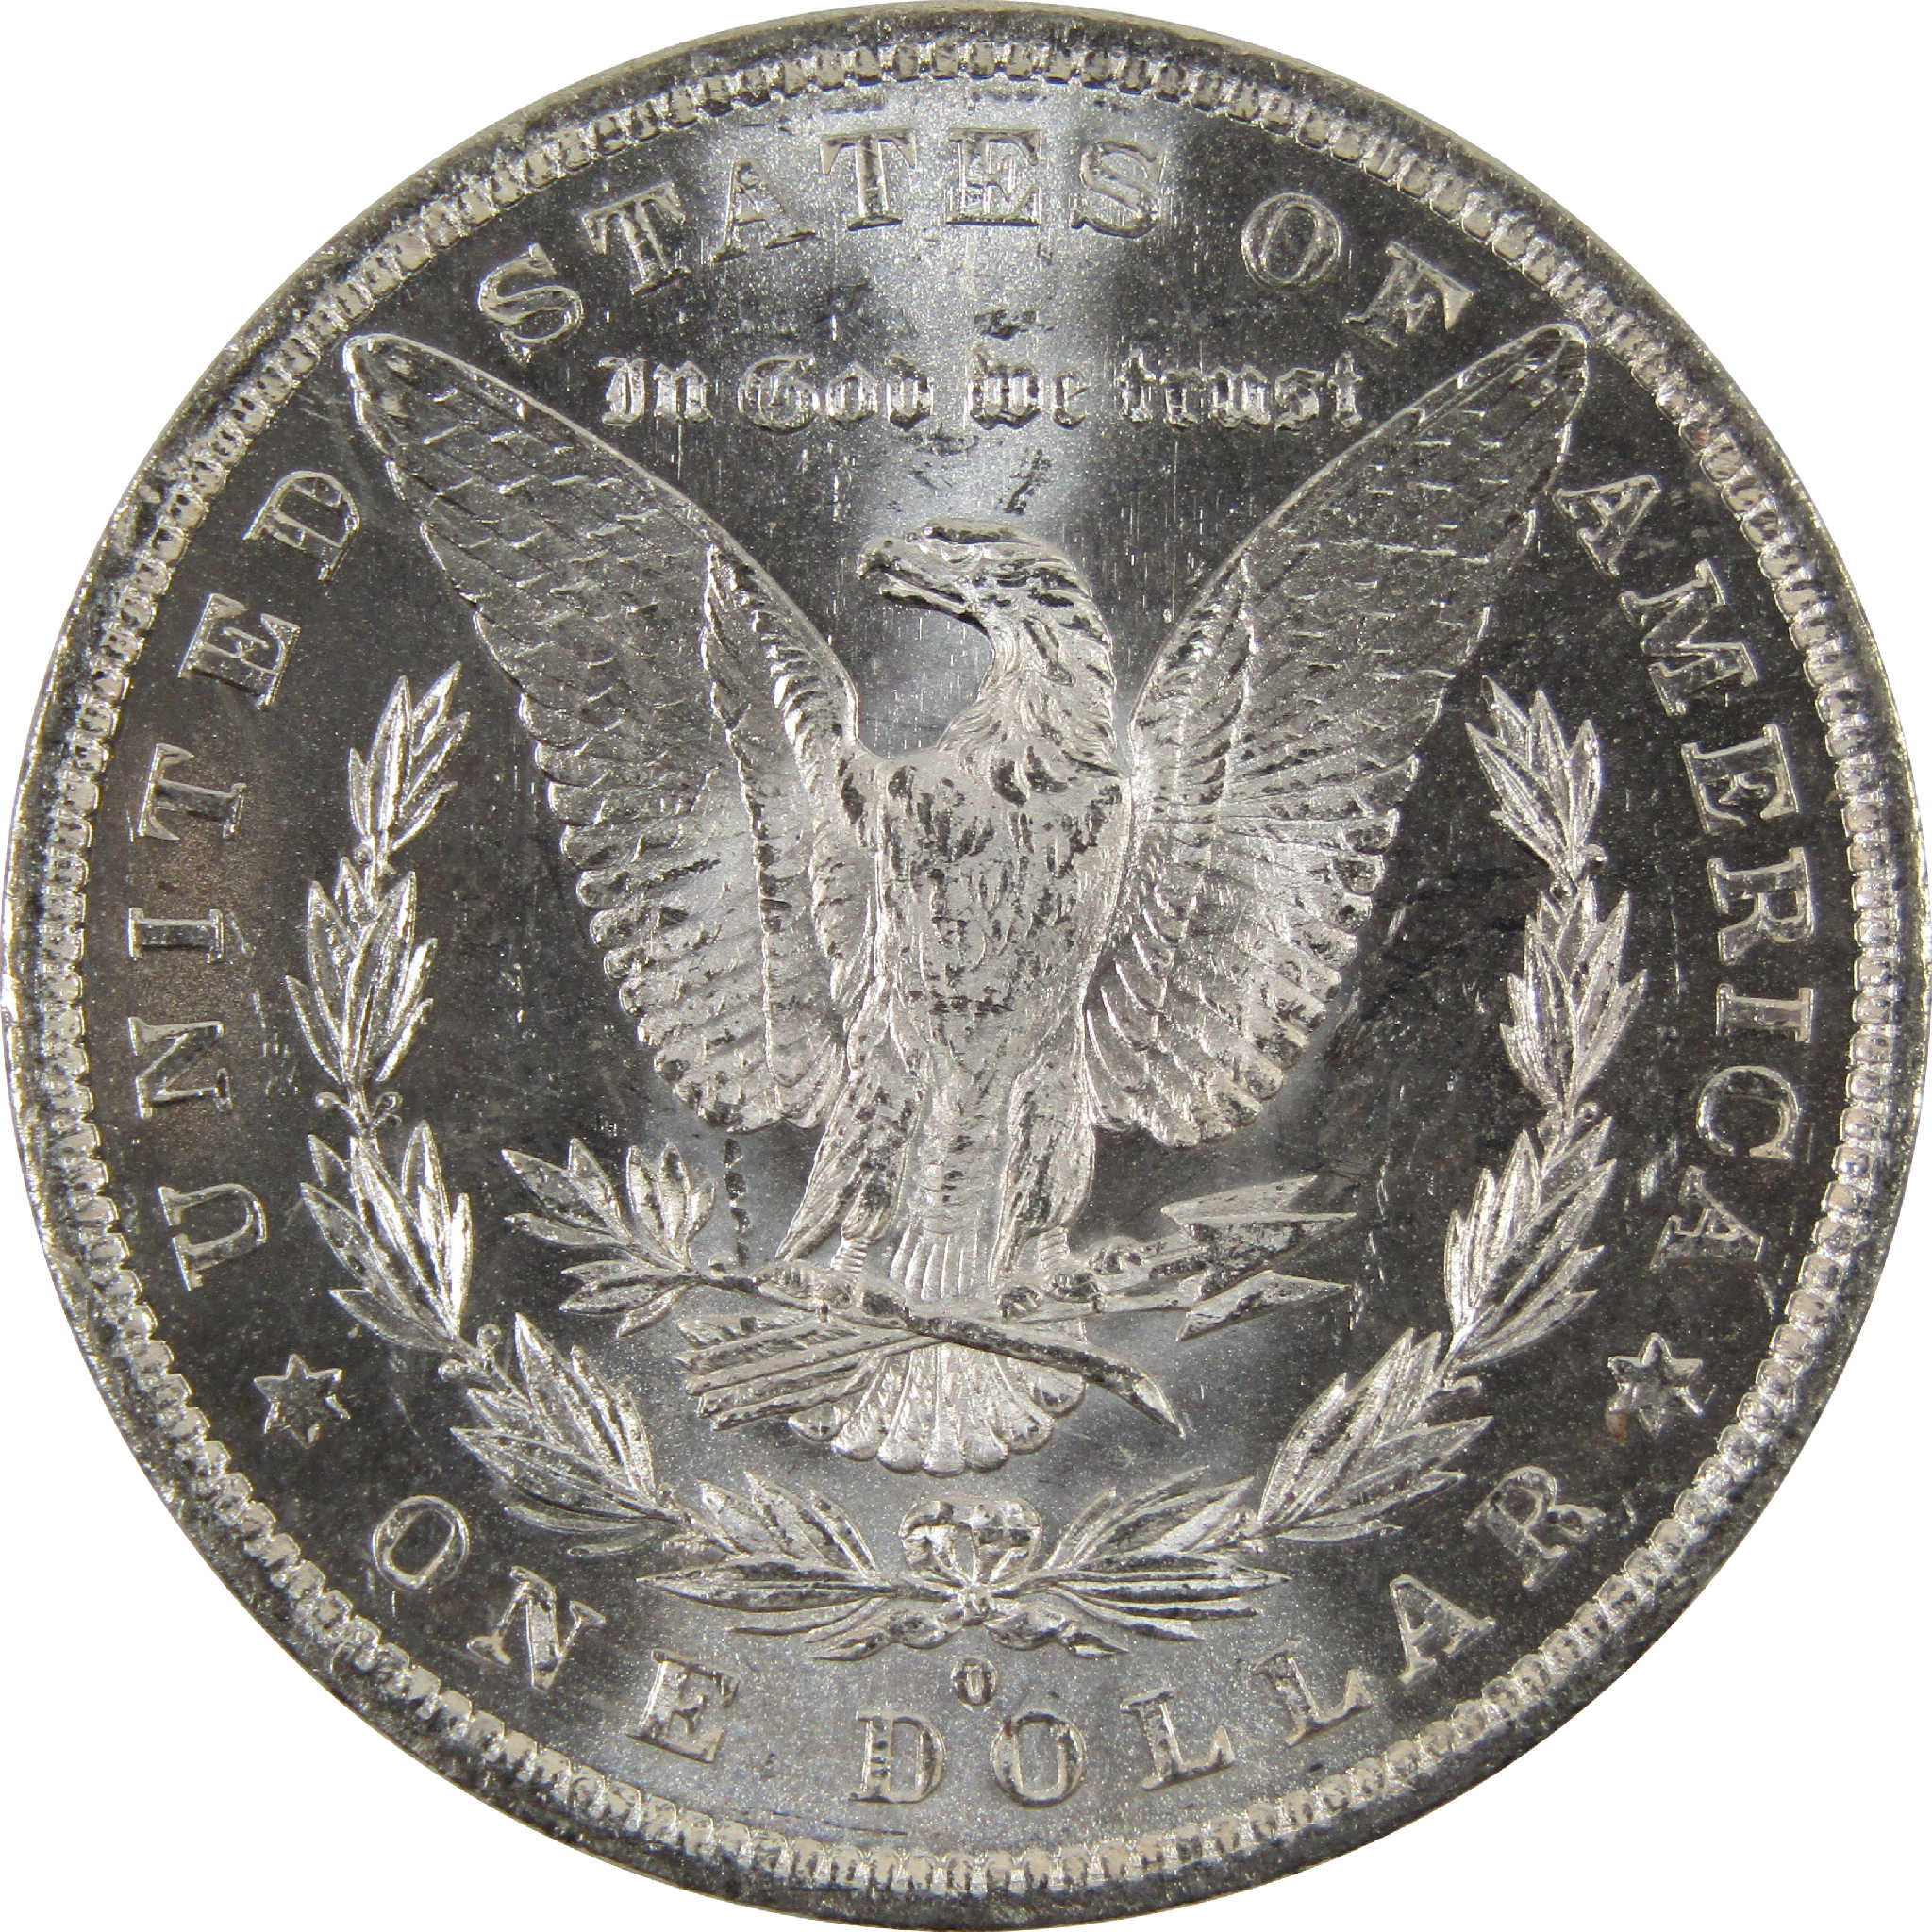 1882 O/O Morgan Dollar AU About Uncirculated 90% Silver $1 SKU:I8892 - Morgan coin - Morgan silver dollar - Morgan silver dollar for sale - Profile Coins &amp; Collectibles